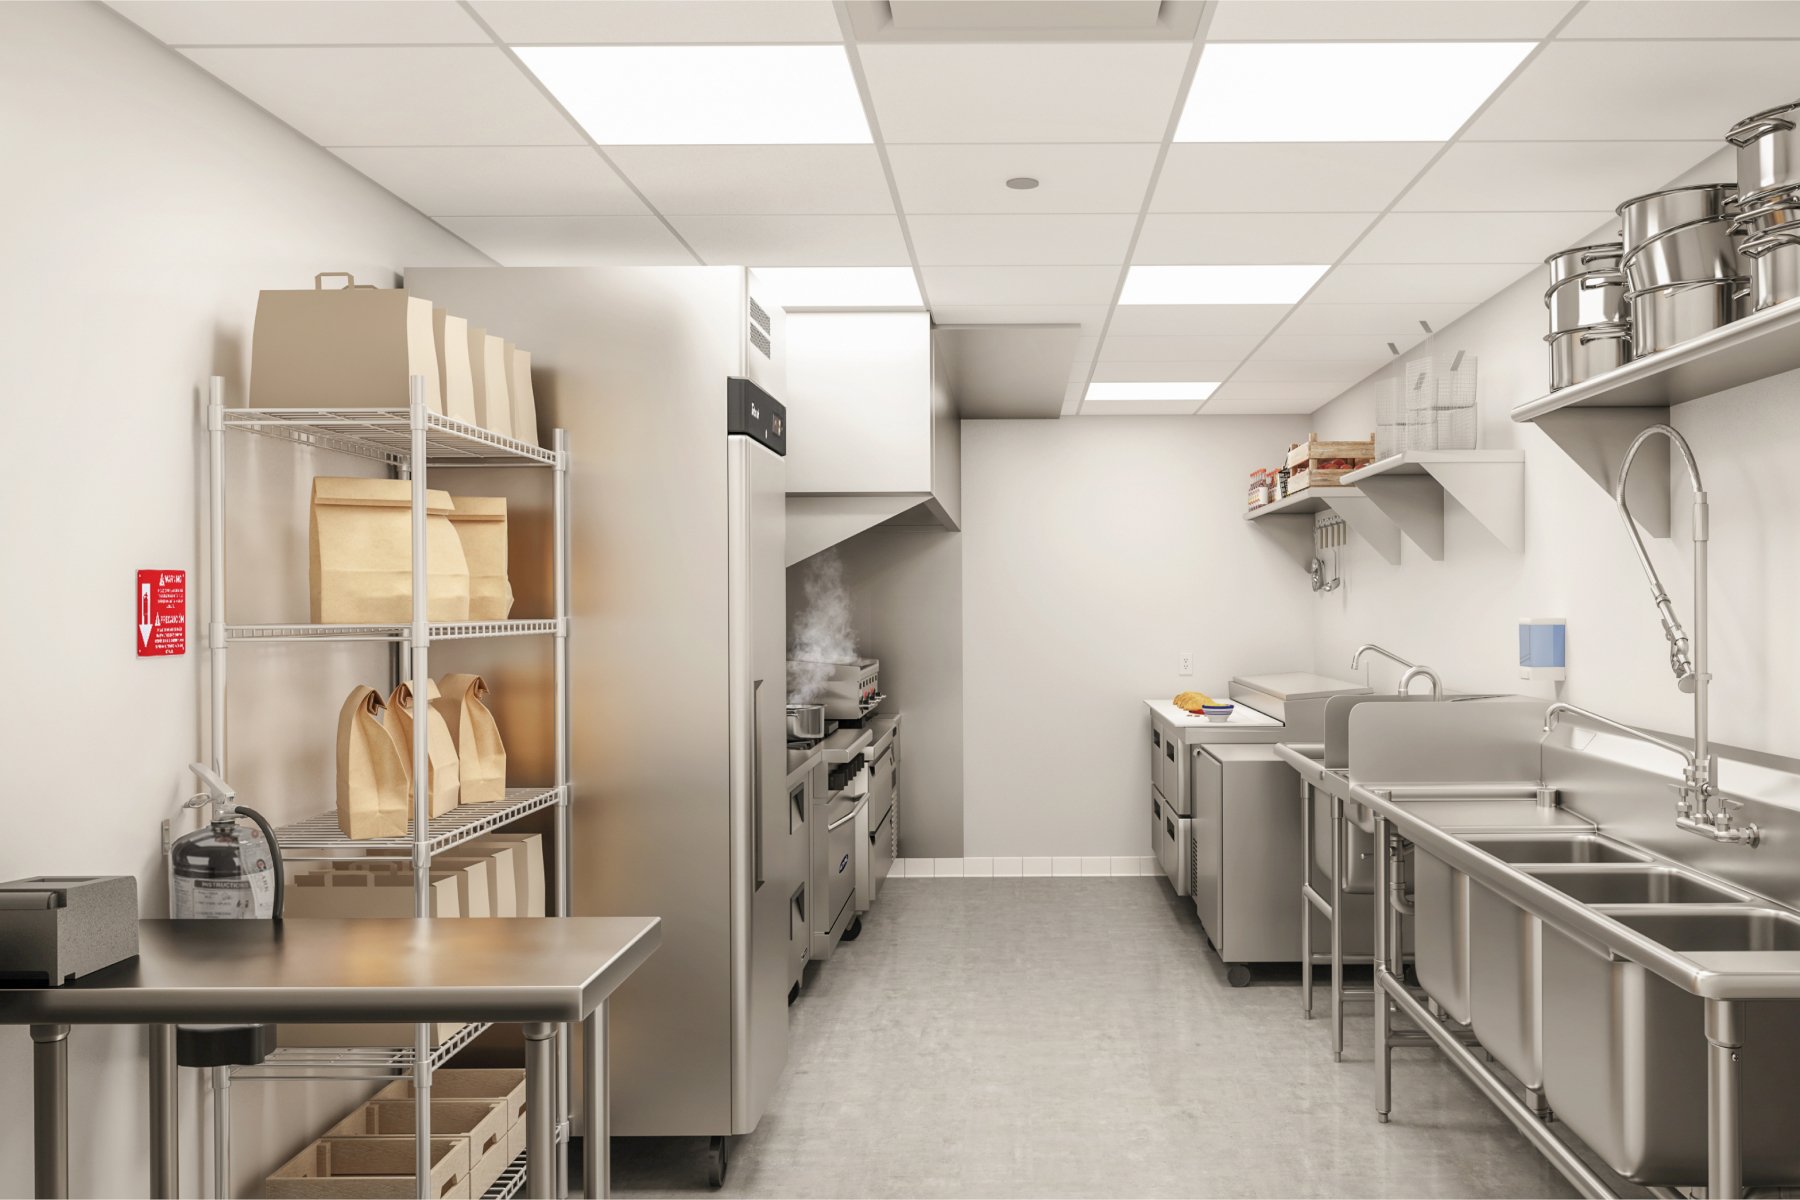 5 commercial kitchen layout ideas for your restaurant | CloudKitchens